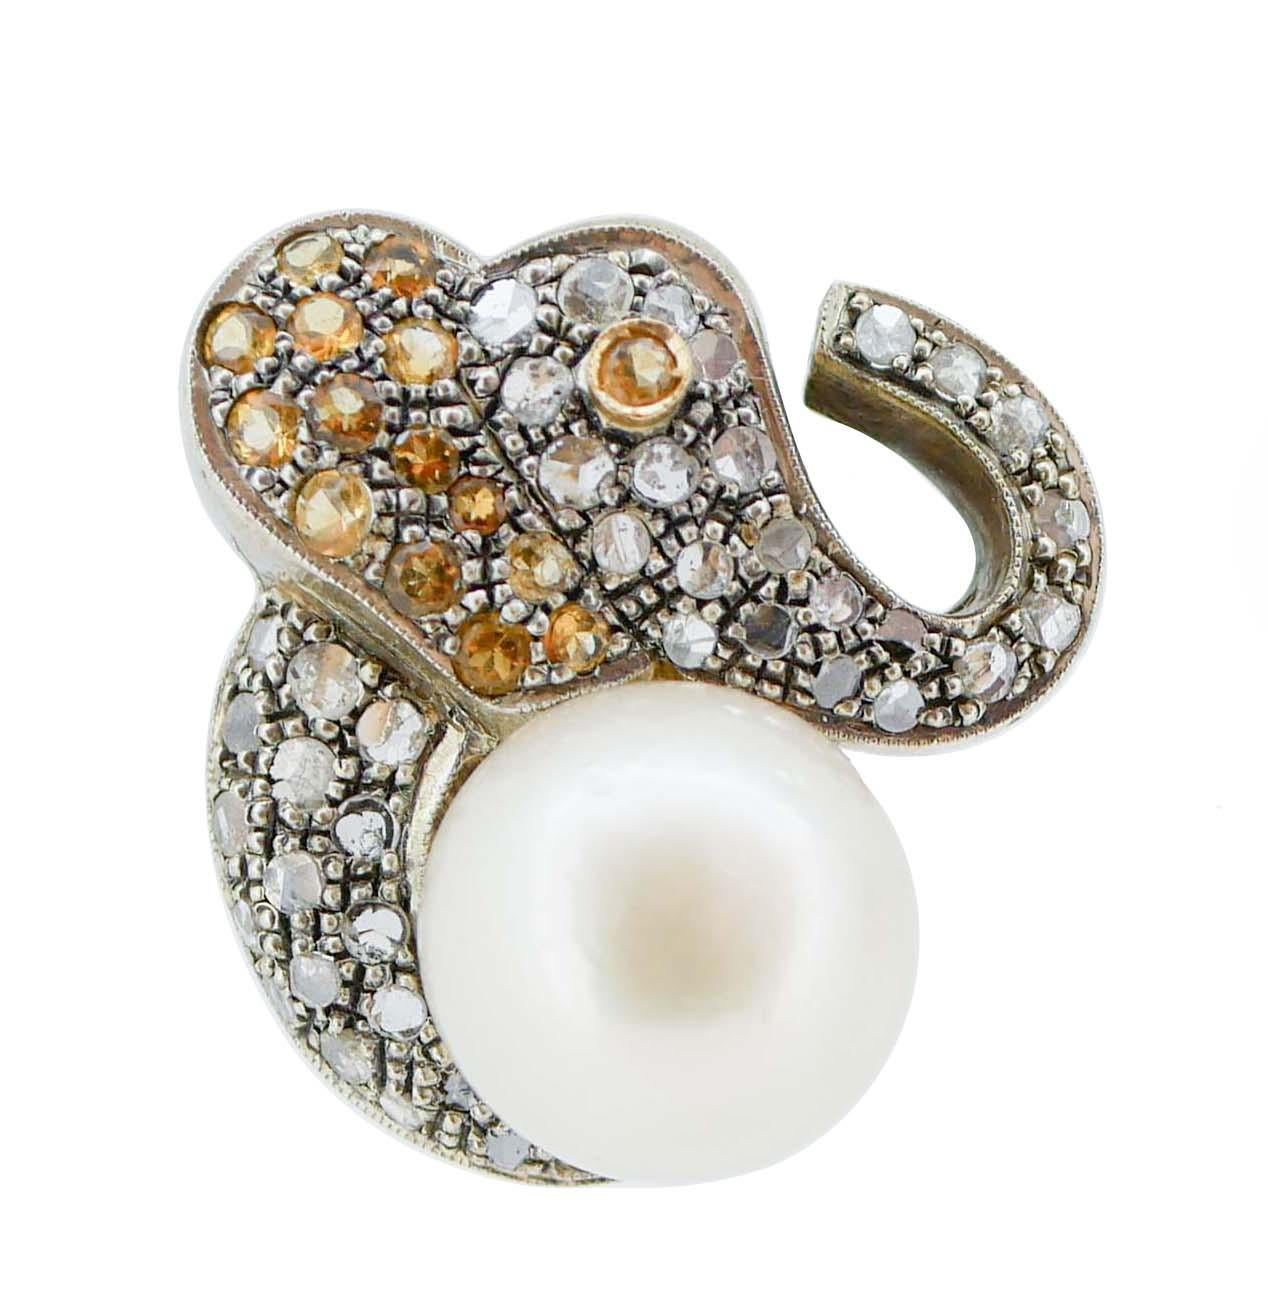 SHIPPING POLICY: 
No additional costs will be added to this order. 
Shipping costs will be totally covered by the seller (customs duties included).

Fashion elephant-shape arrings in 18 kt rose gold and silver structure mounted with a pearl; a